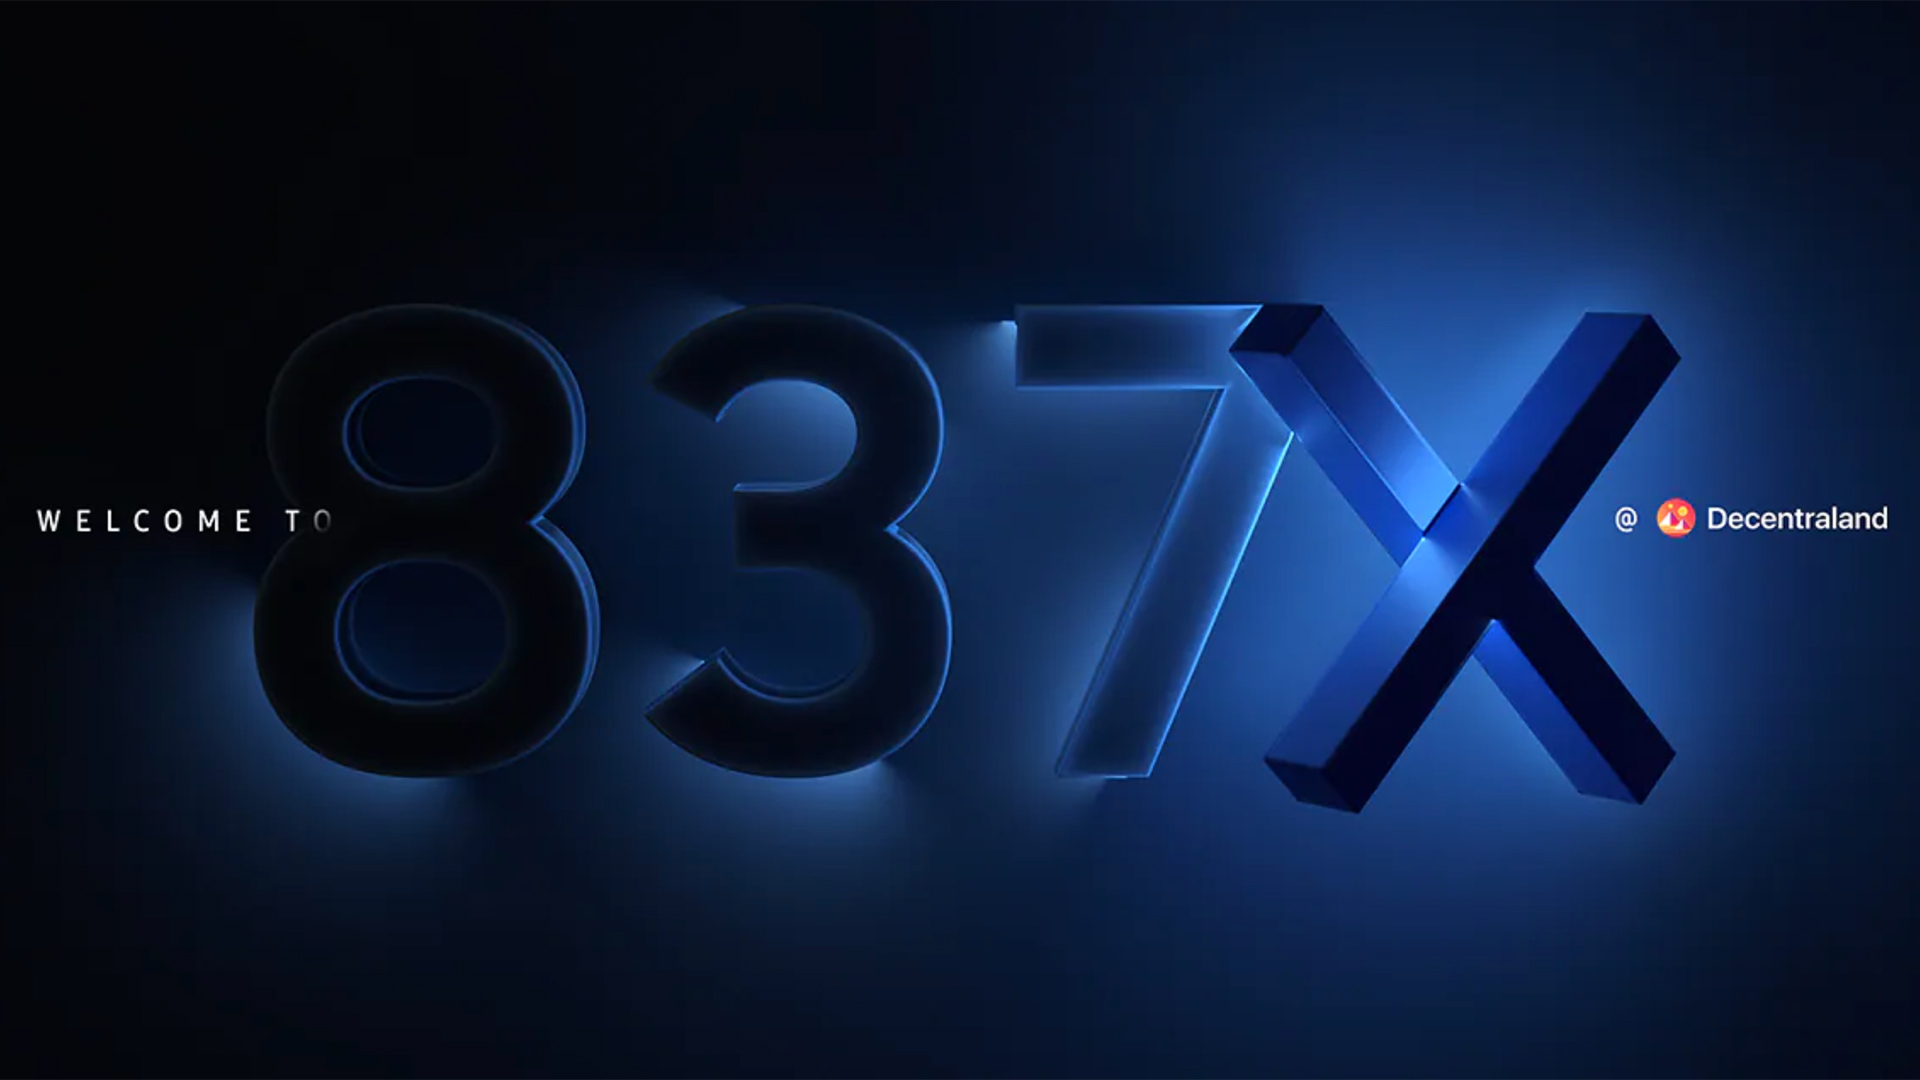 The 837X logo for Samsung Galaxy Unpacked's launch event in the metaverse